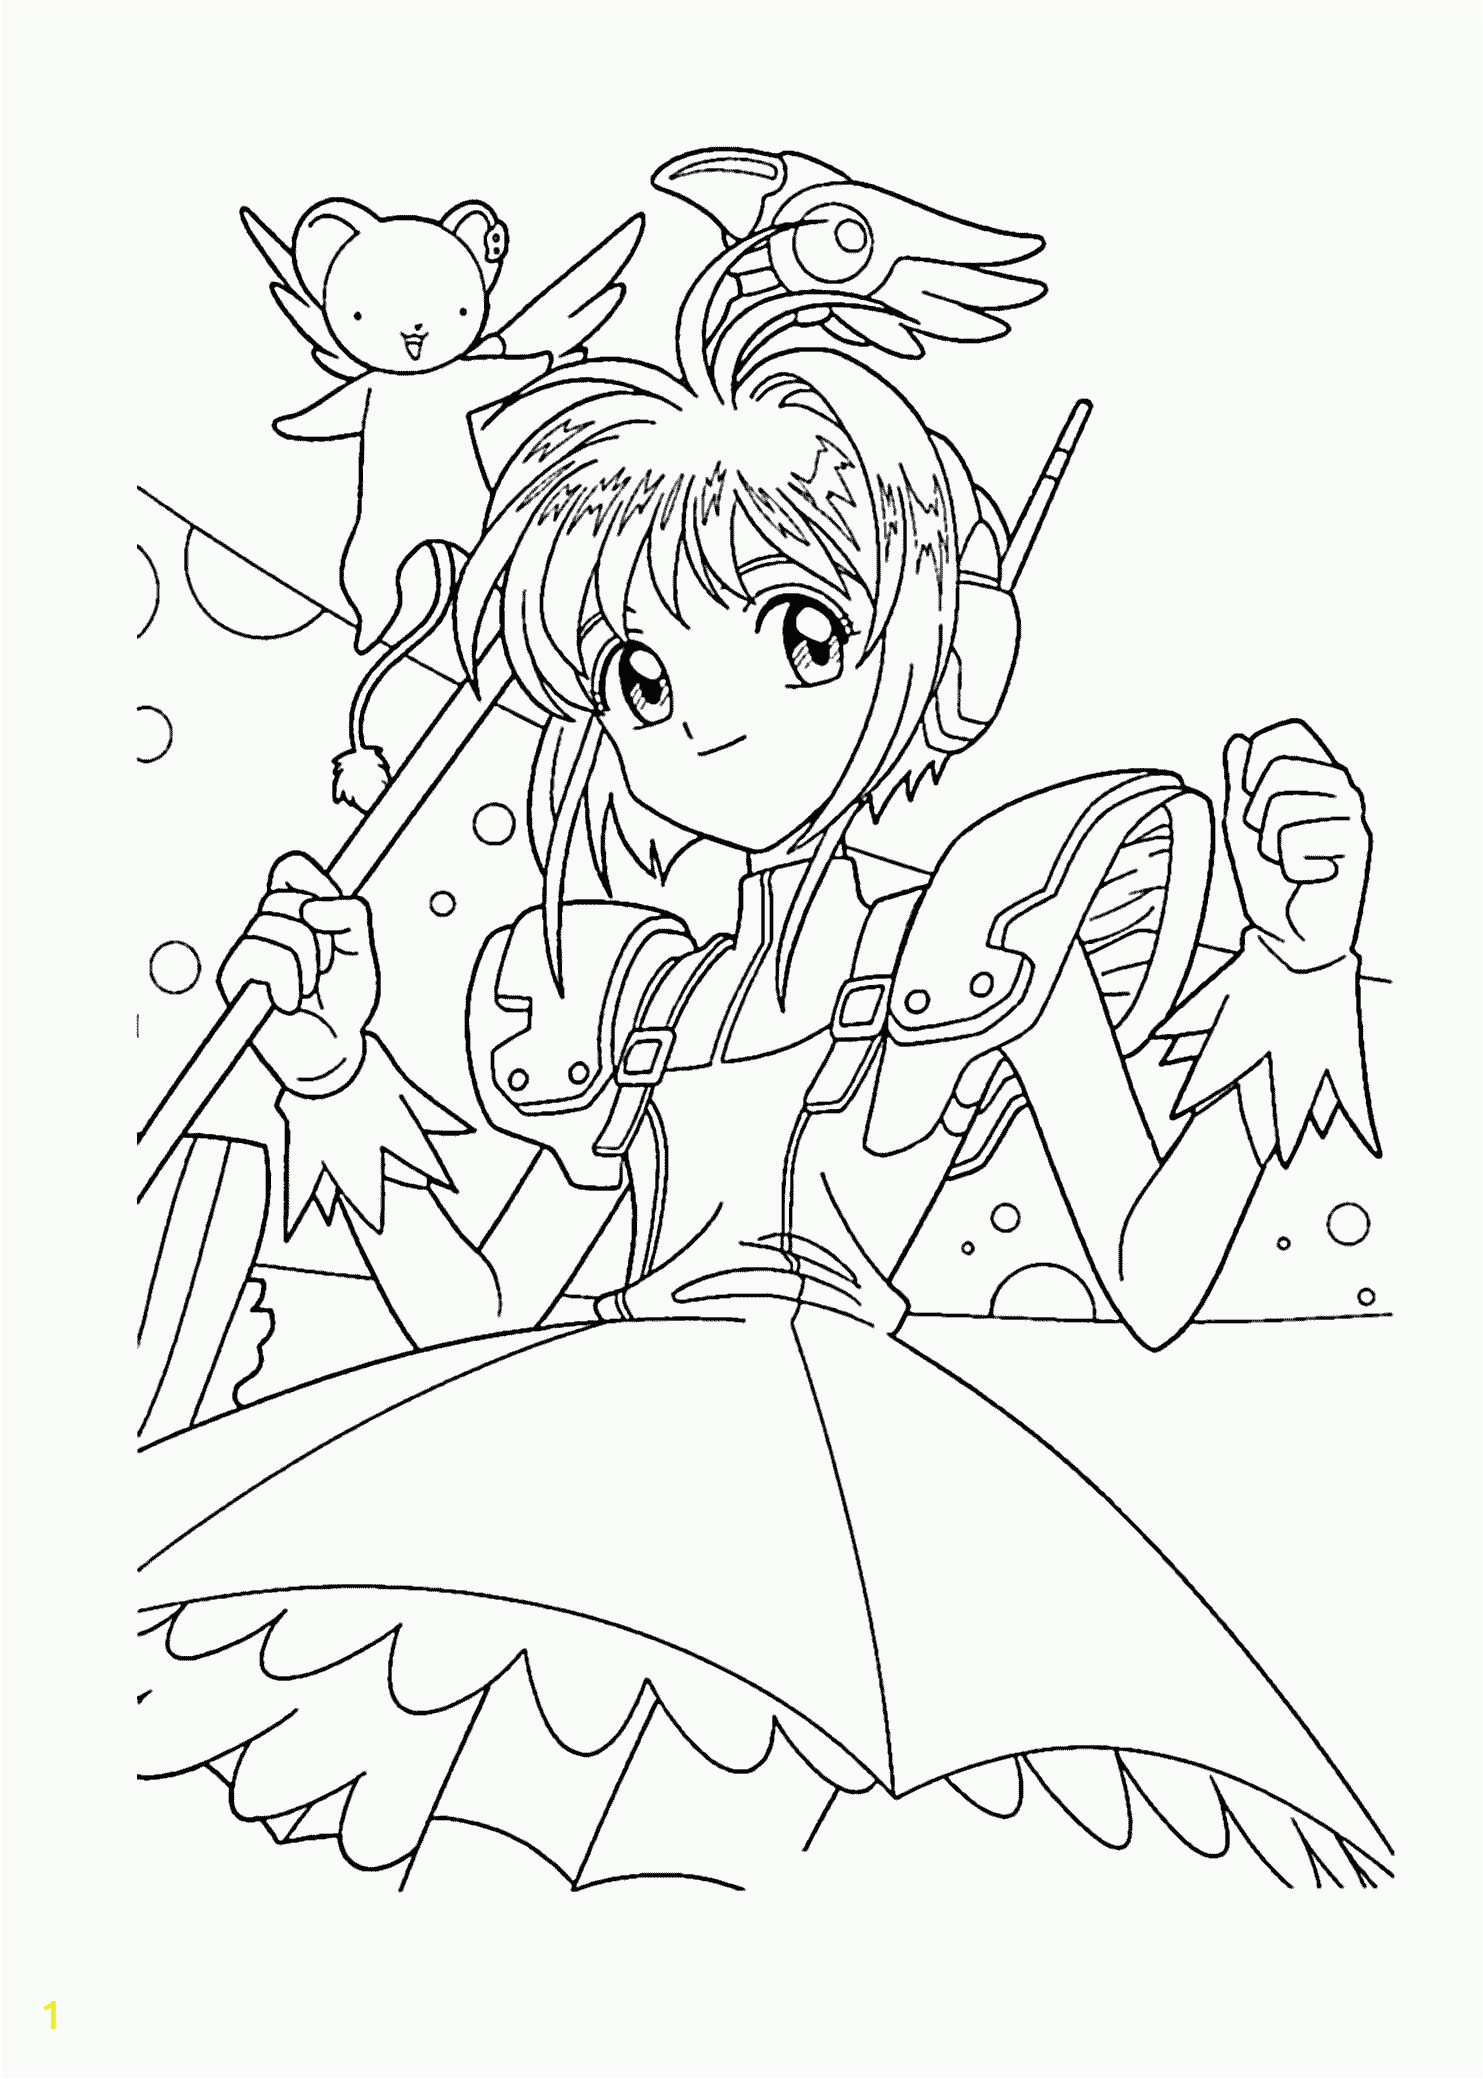 Anime Coloring Pages for Adults Online Sakura Manga Coloring Pages for Kids Printable Free